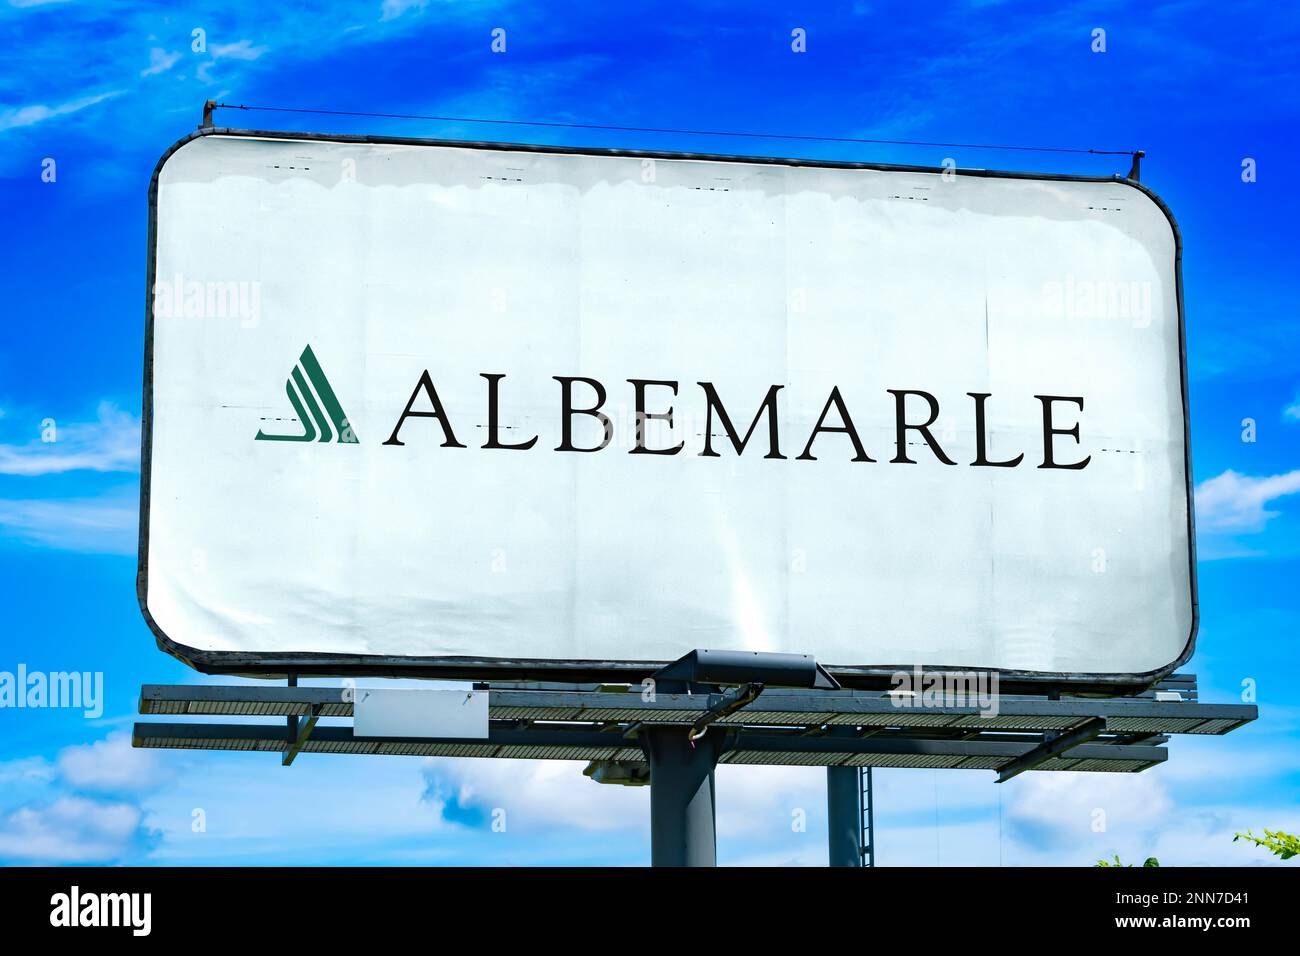 POZNAN, POL - JAN 11, 2023: Advertisement billboard displaying logo of Albemarle, a specialty chemicals manufacturing company based in Charlotte, Nort Stock Photo